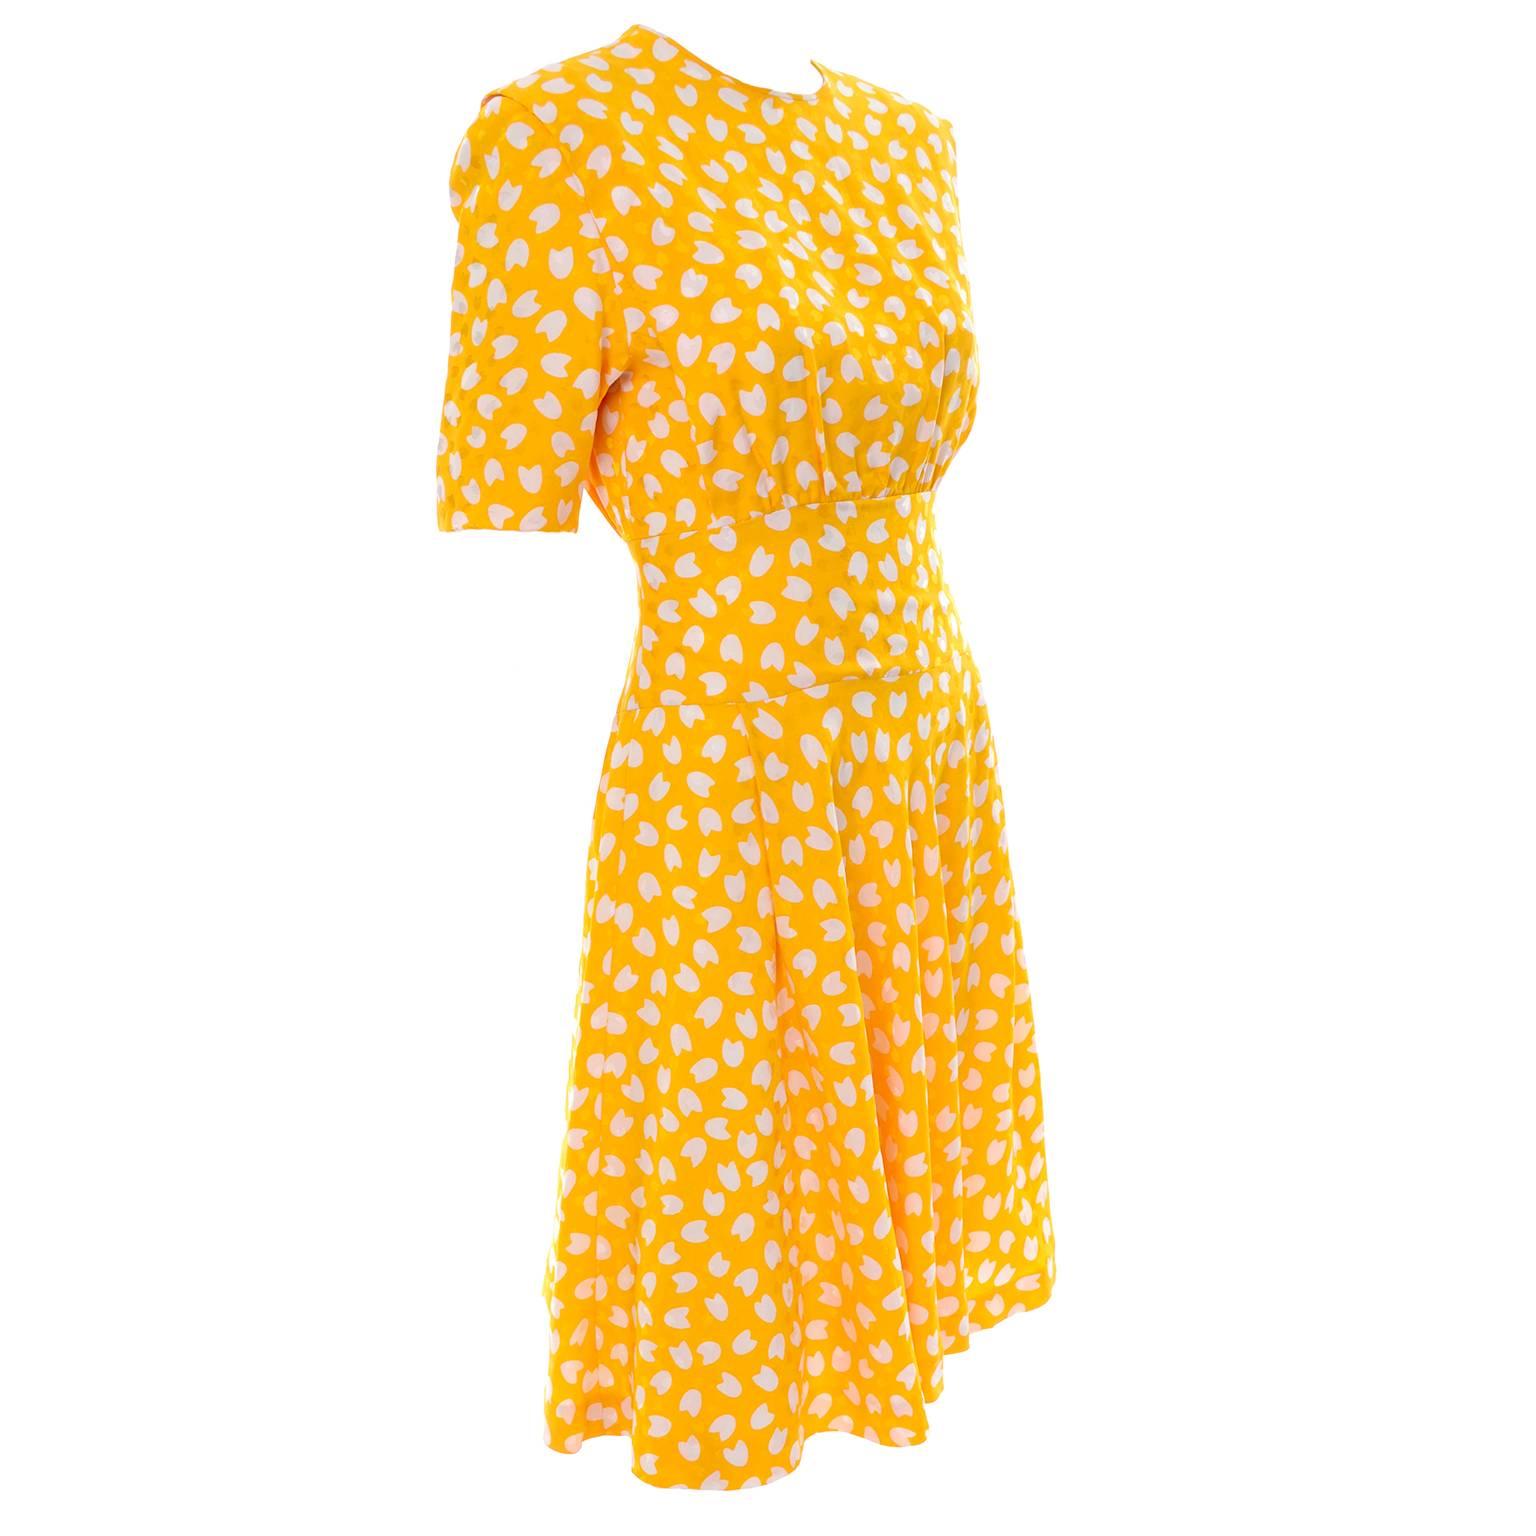 Vintage Silk Dress Unlabeled Couture in Abstract Yellow & White Tulip Print